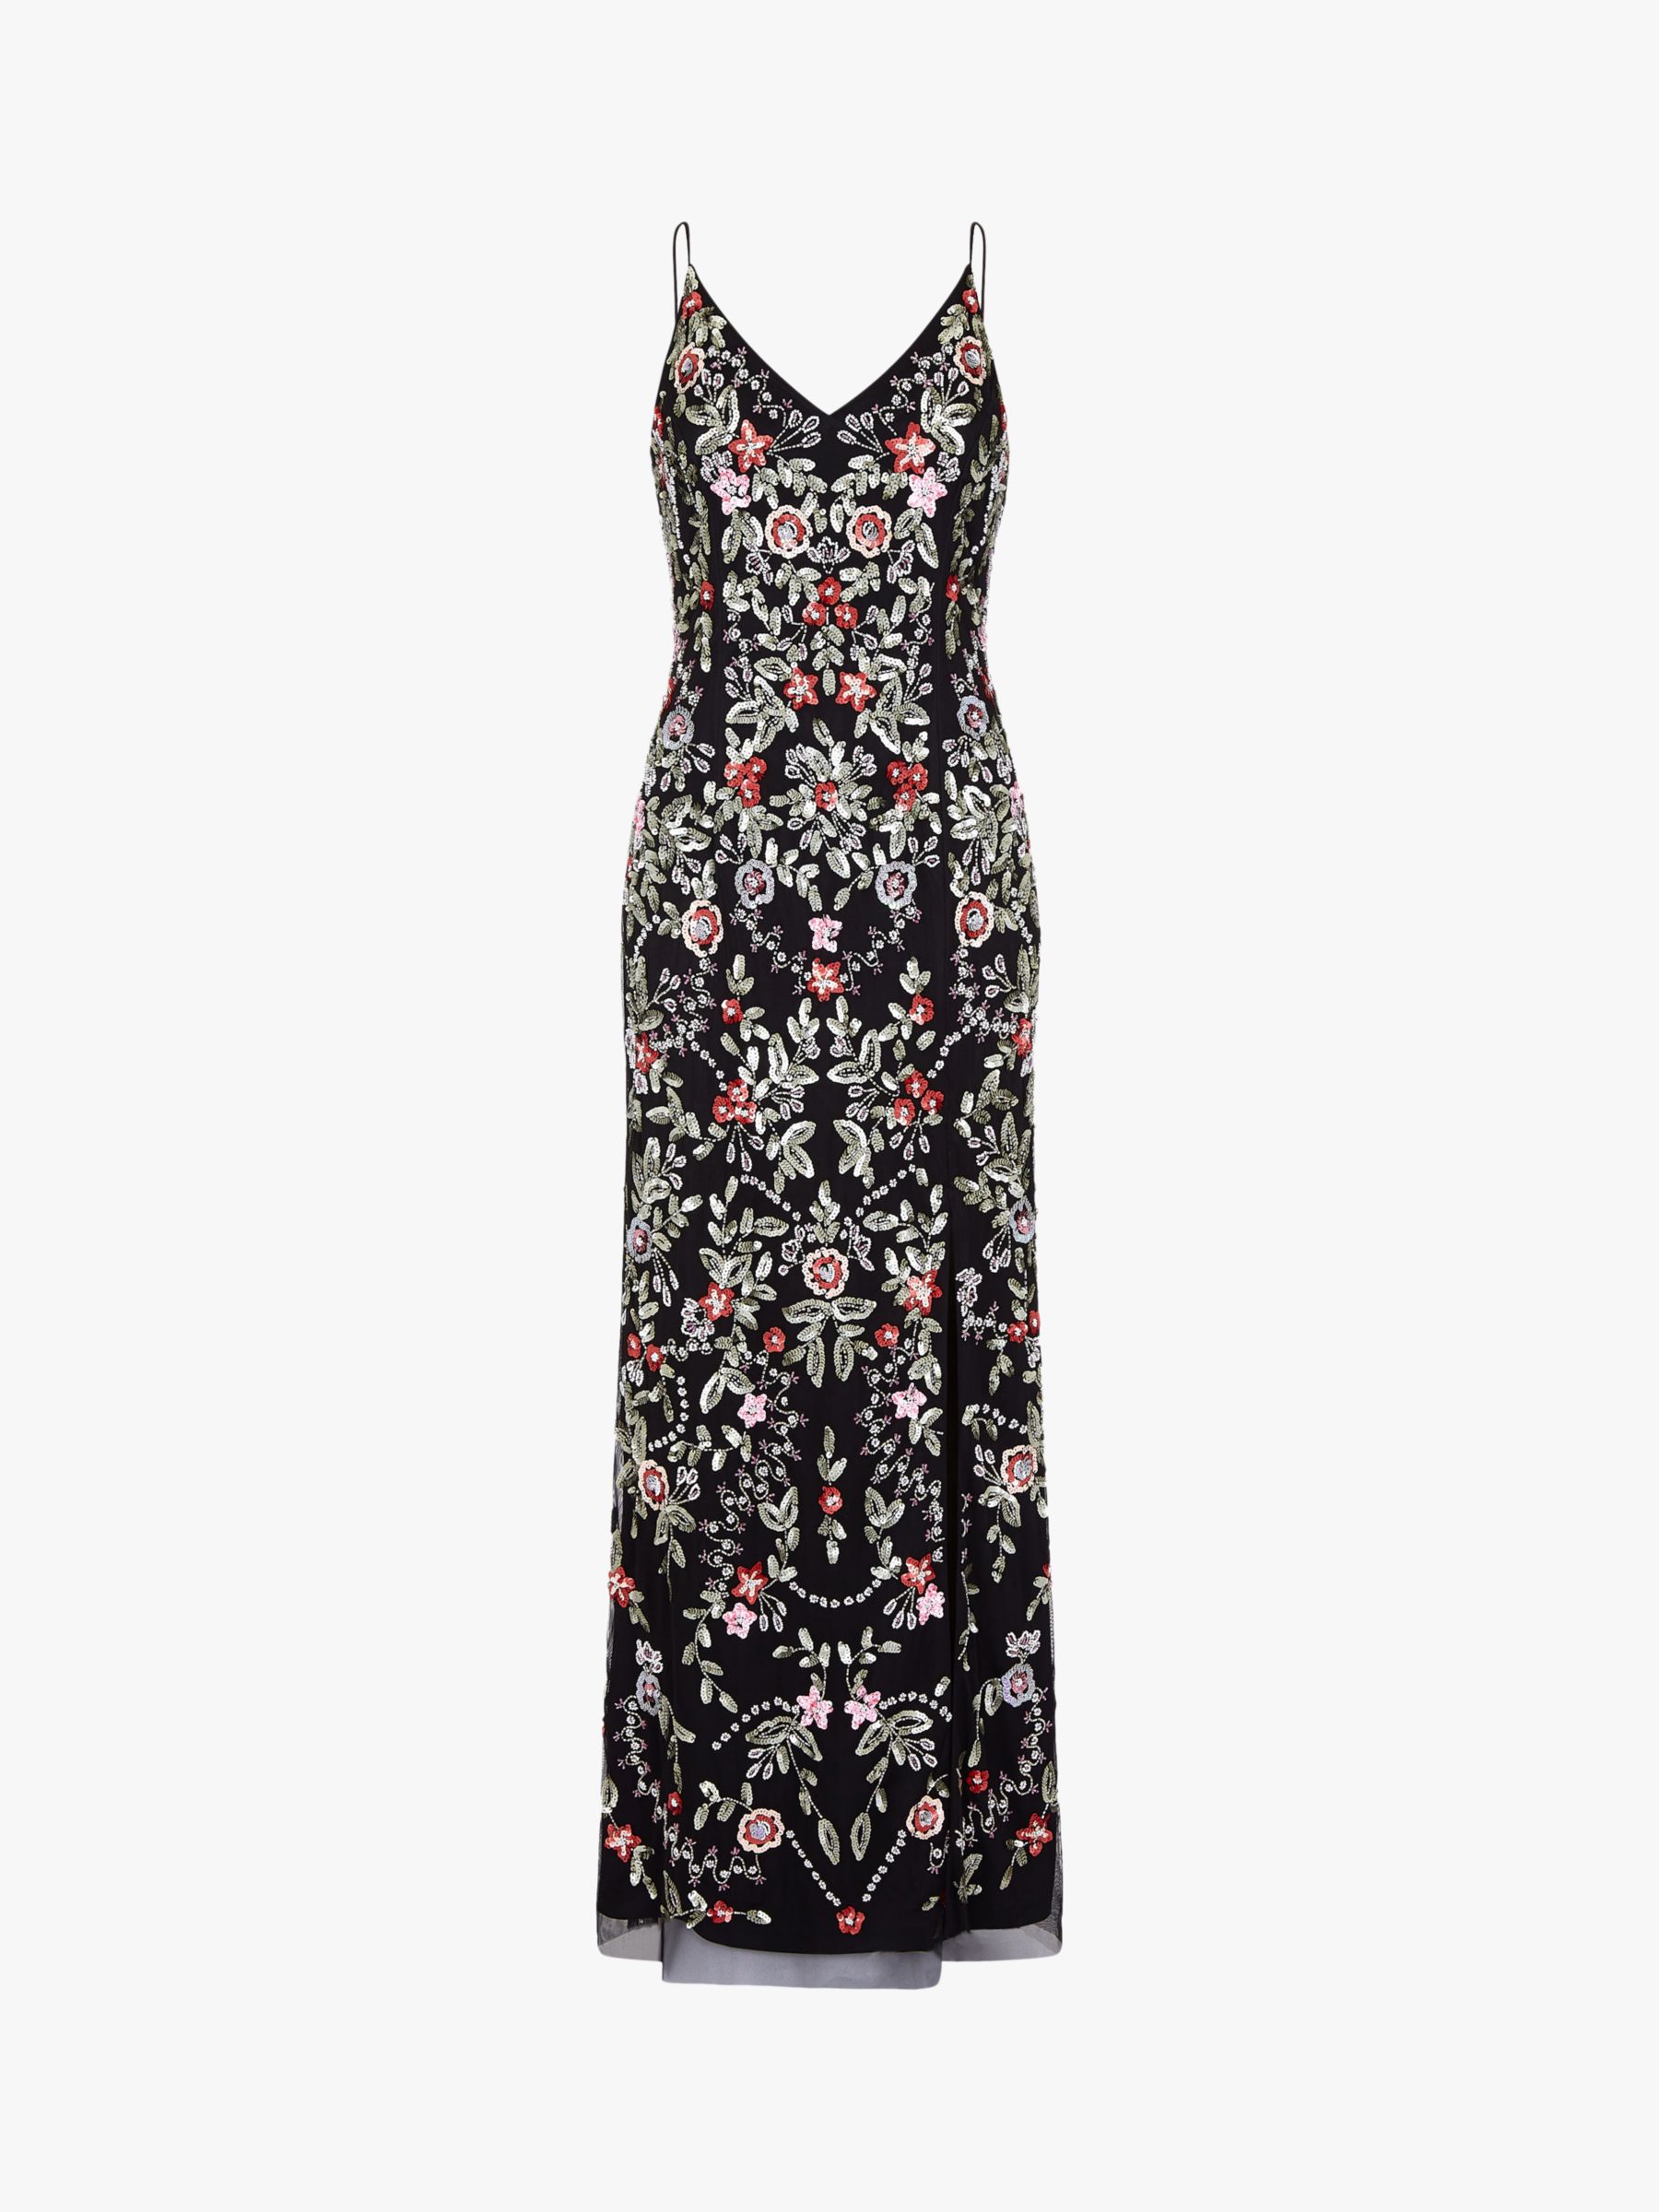 Adrianna Papell Beaded Floral Dress, Black